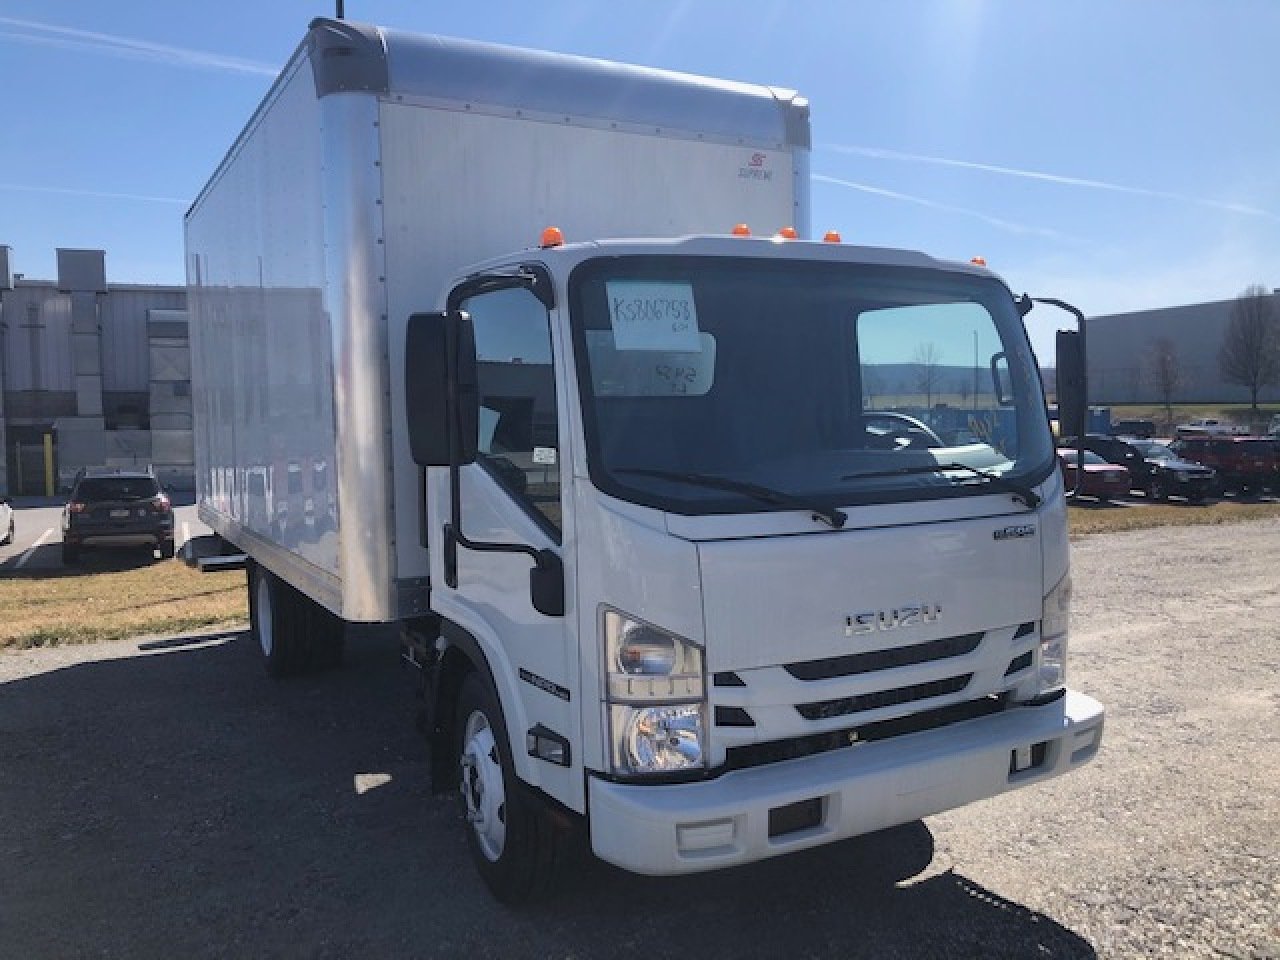 New Truck Inventory - 1001430 01 2 - 69